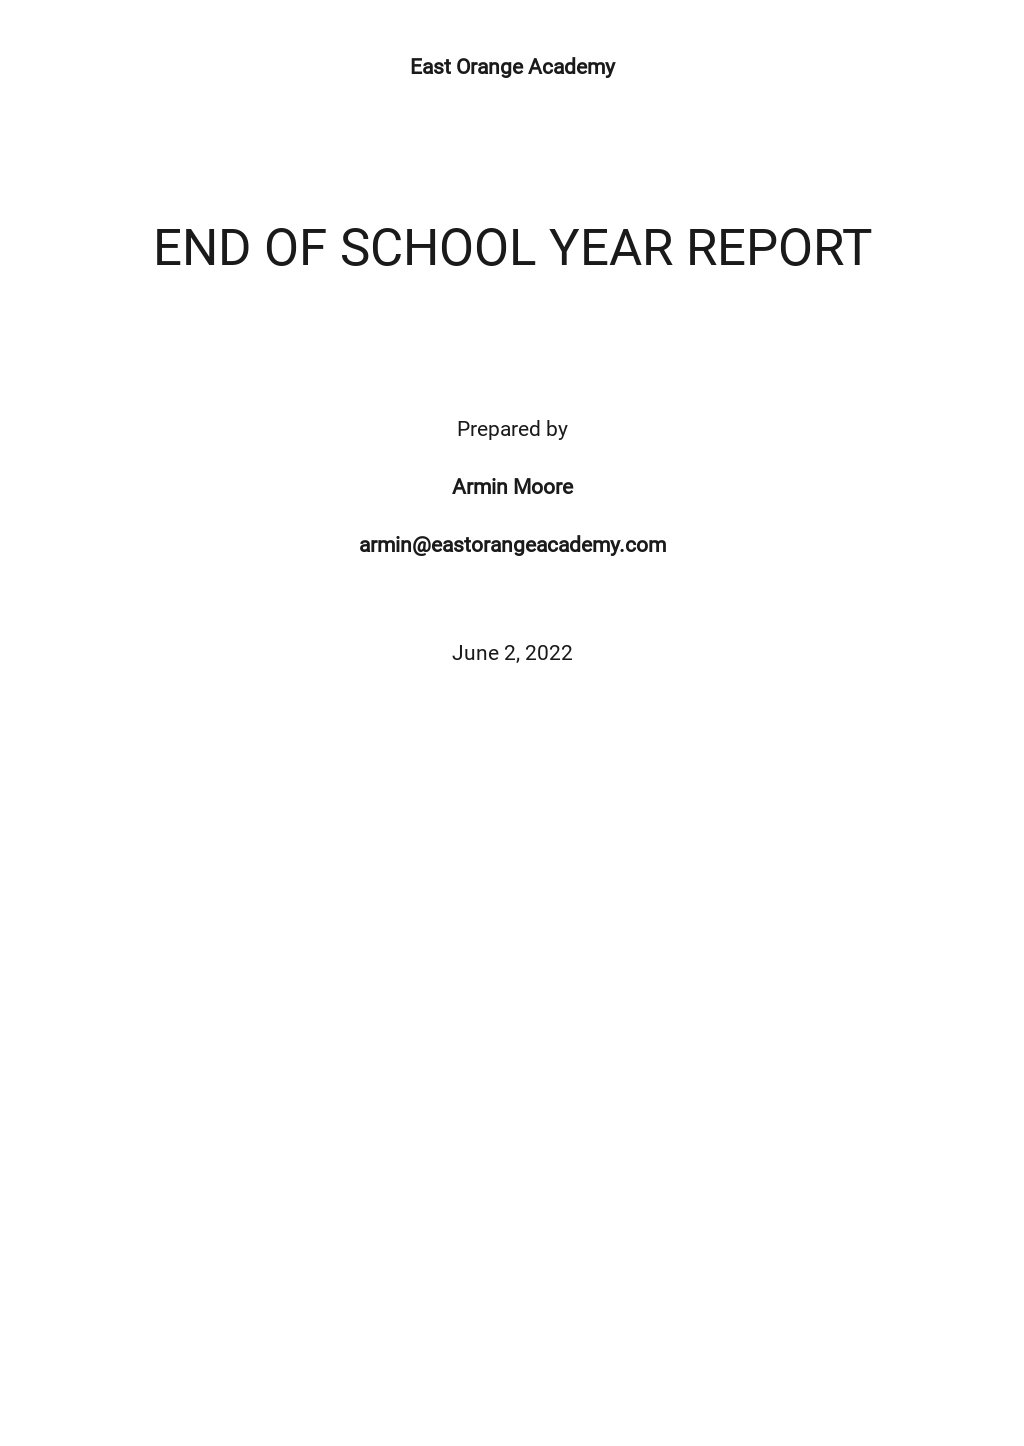 End of Year School Report Template.jpe